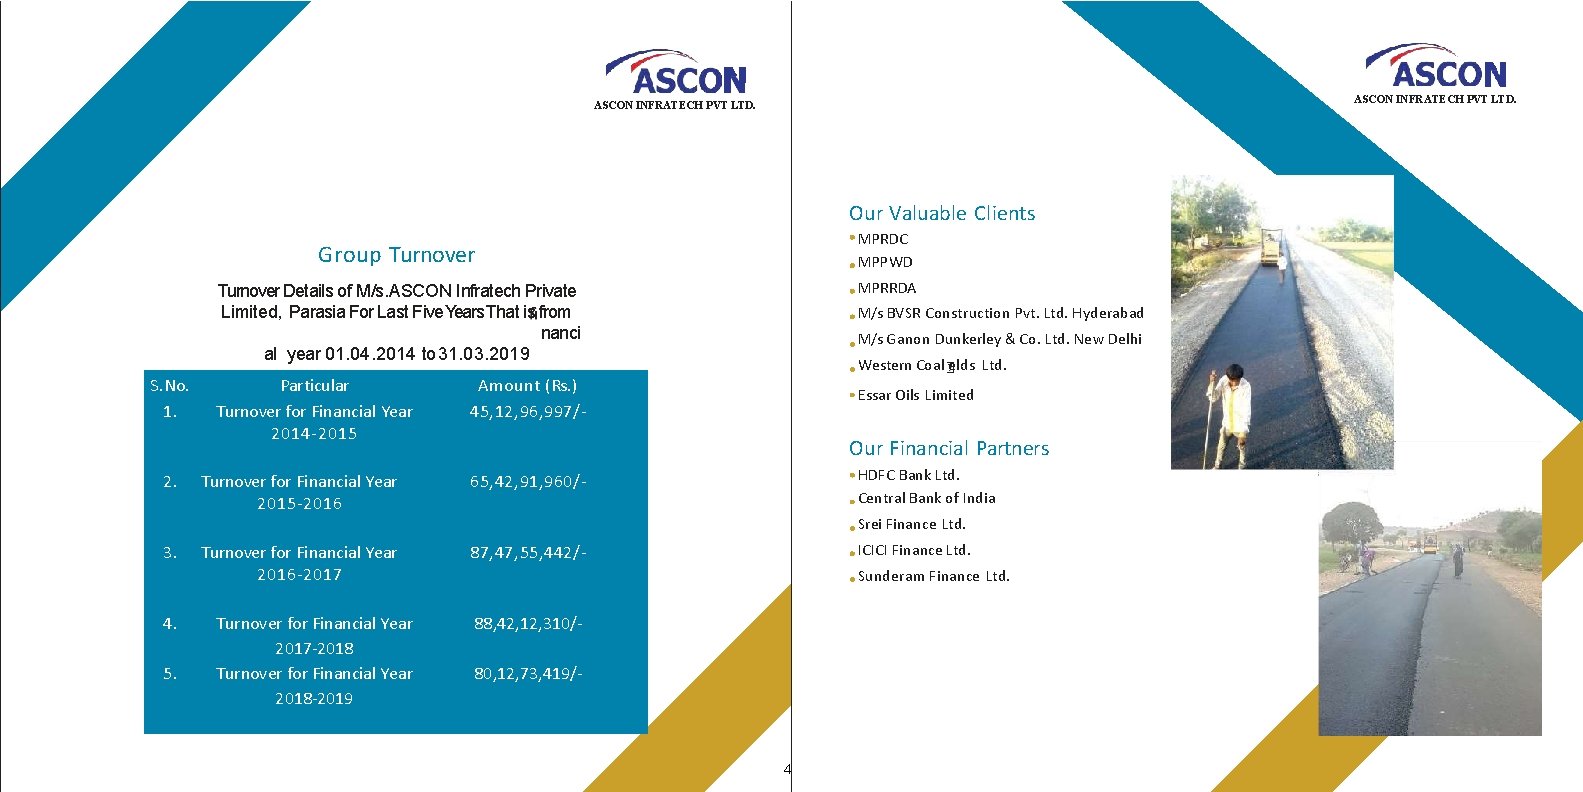 ASCON INFRATECH PVT LTD. Our Valuable Clients MPRDC MPPWD Group Turnover MPRRDA Turnover Details